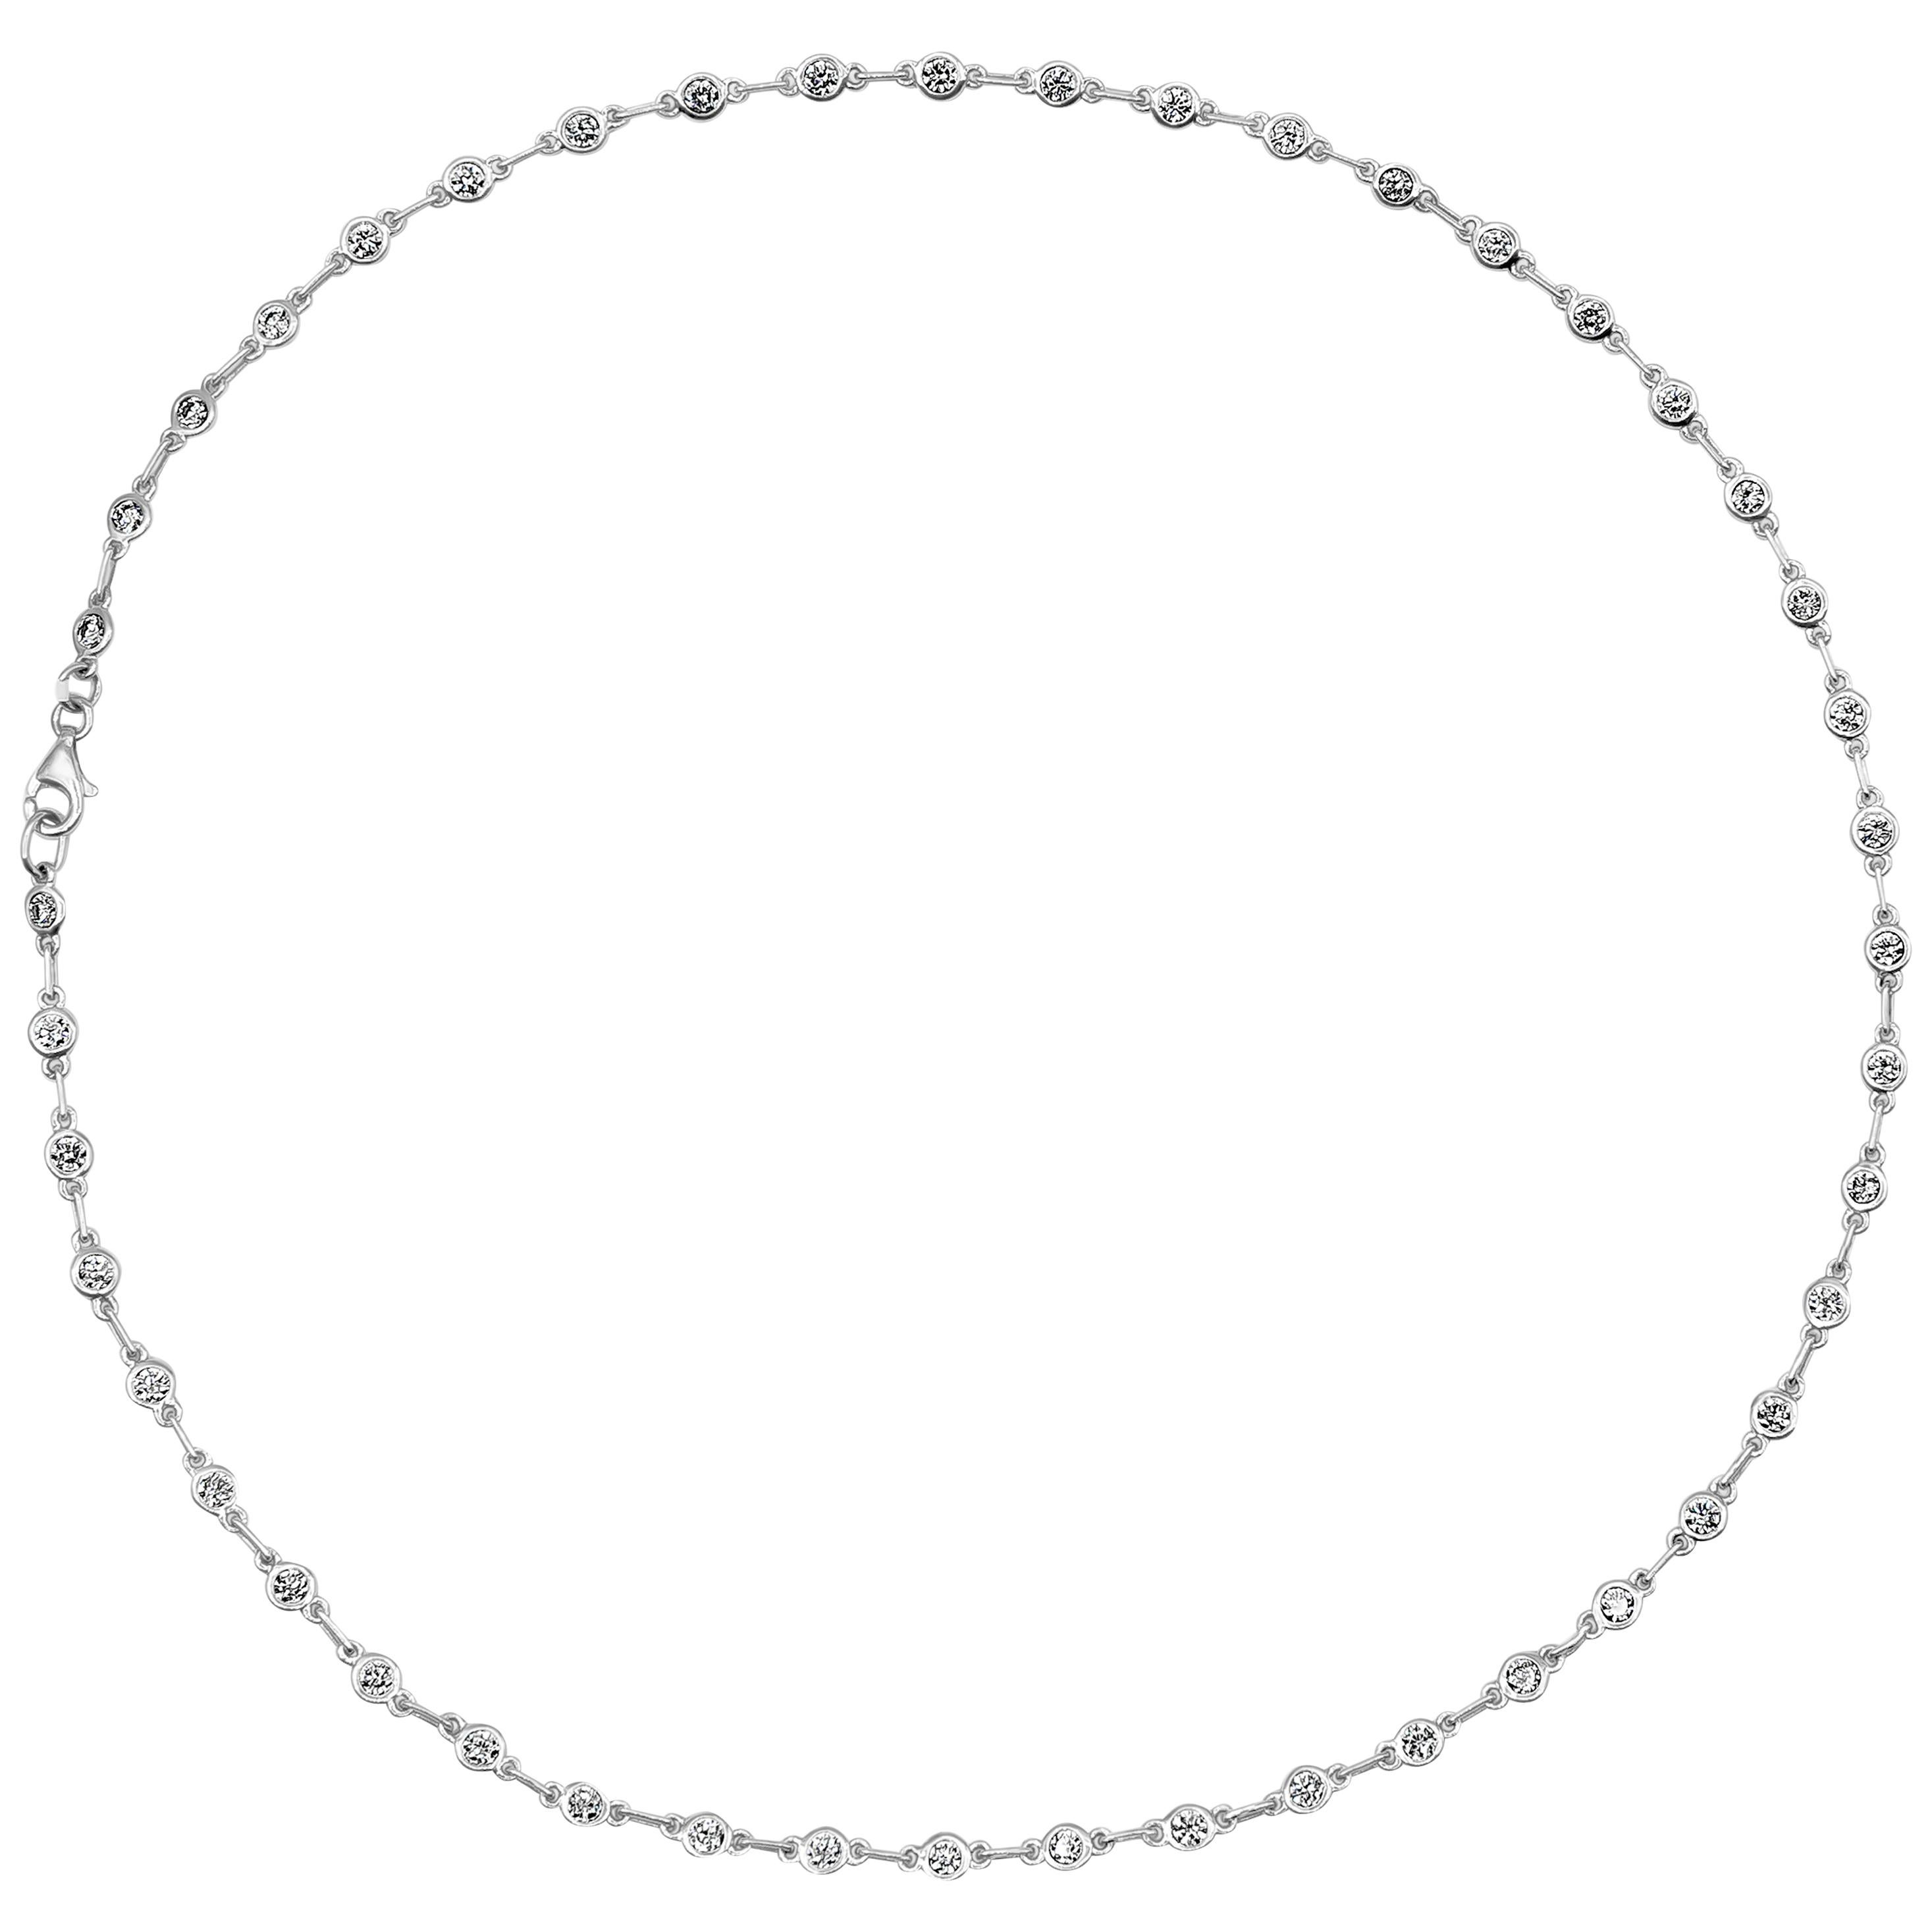 Roman Malakov 3.39 Carats Total Brilliant Round Diamond by The Yard Necklace For Sale